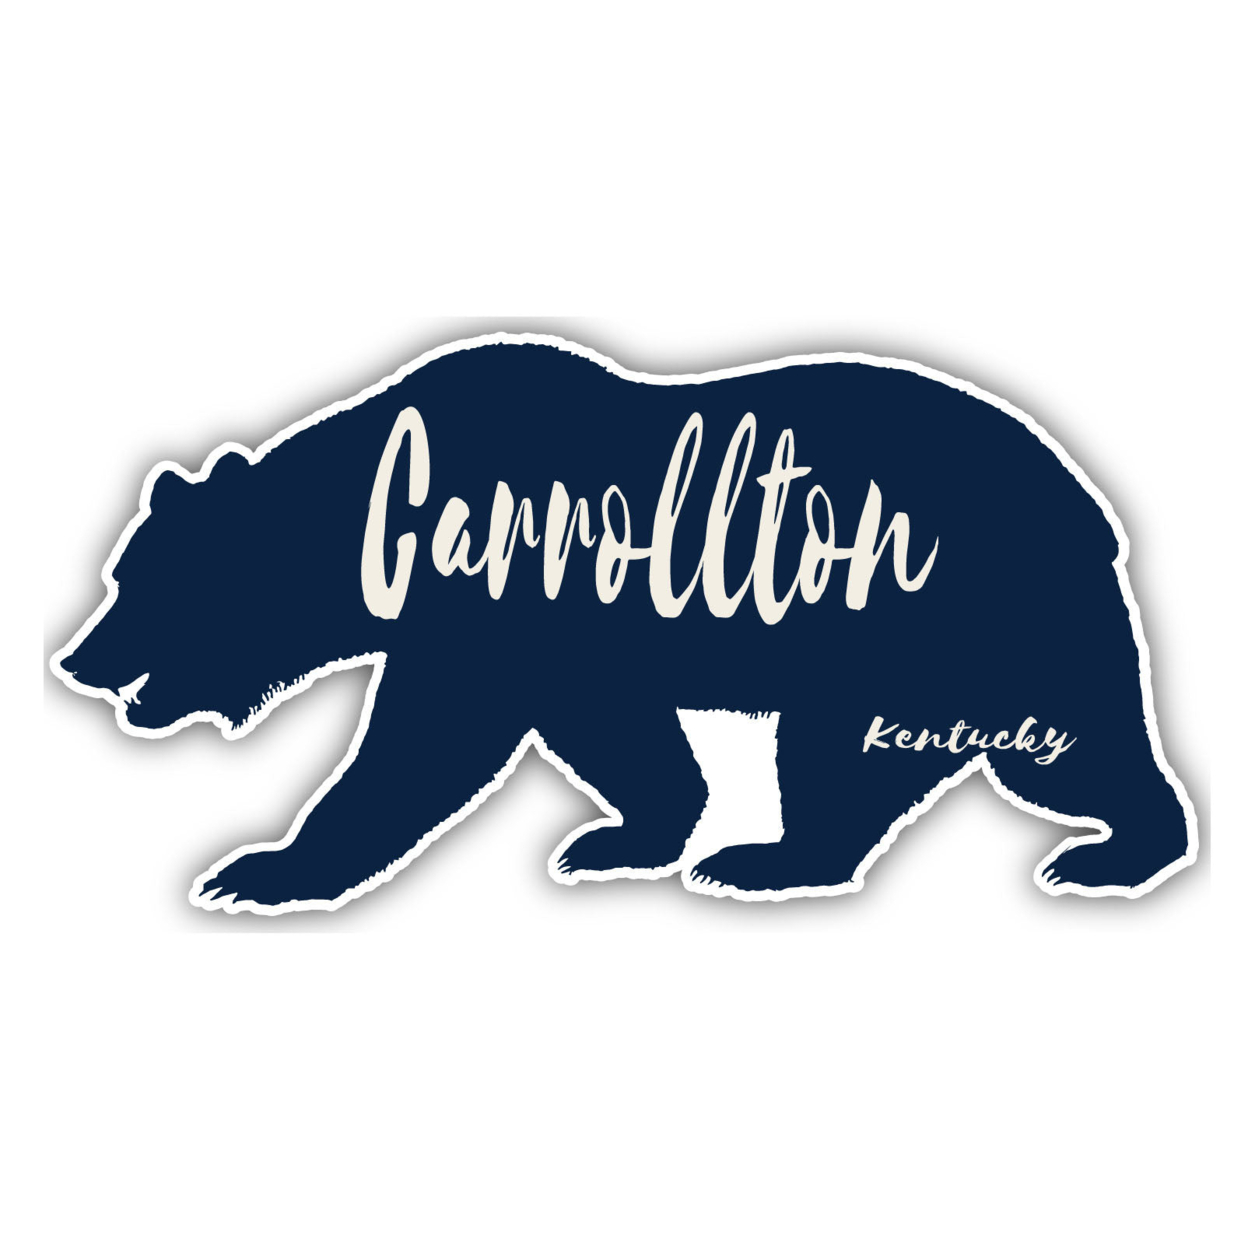 Carrollton Kentucky Souvenir Decorative Stickers (Choose Theme And Size) - 4-Pack, 10-Inch, Great Outdoors